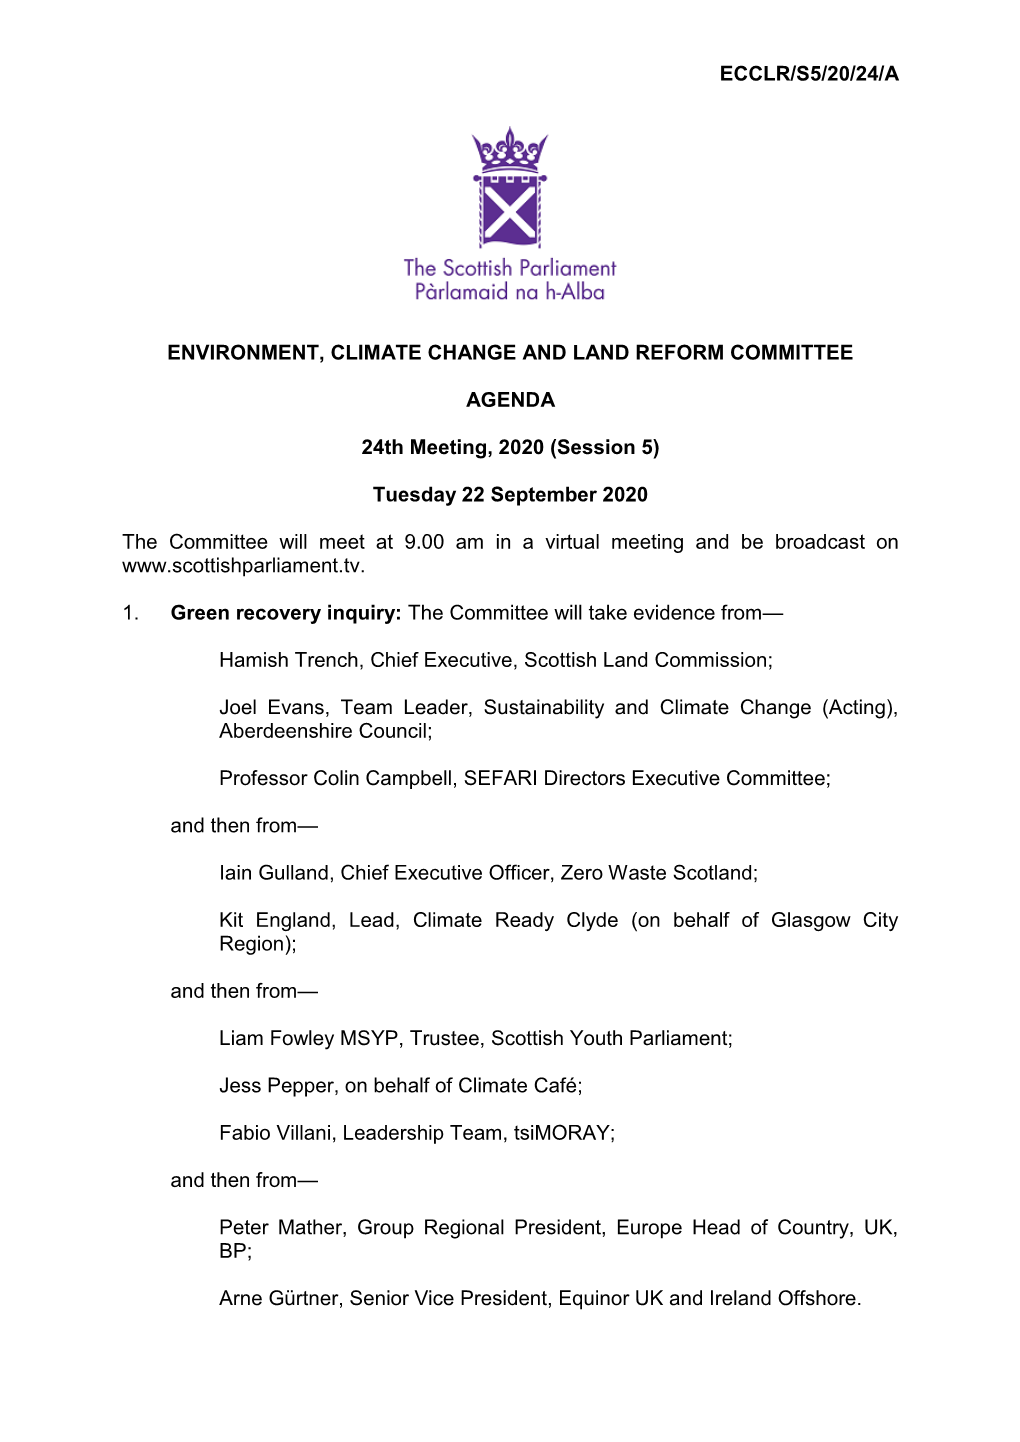 ECCLR/S5/20/24/A ENVIRONMENT, CLIMATE CHANGE and LAND REFORM COMMITTEE AGENDA 24Th Meeting, 2020 (Session 5) Tuesday 22 Septembe